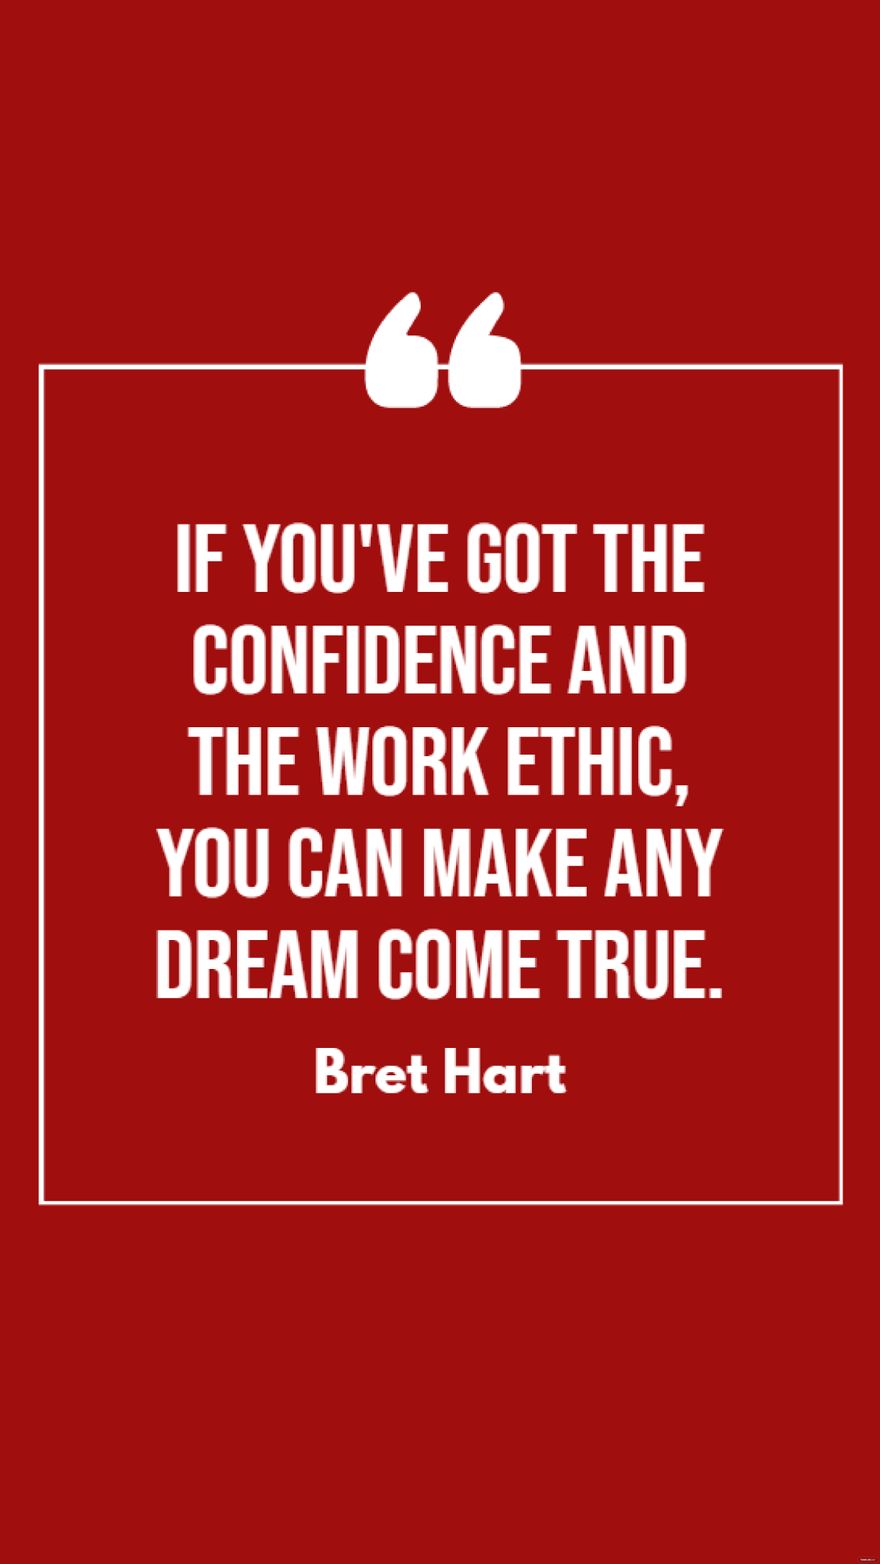 Free Bret Hart - If you've got the confidence and the work ethic, you can make any dream come true. in JPG